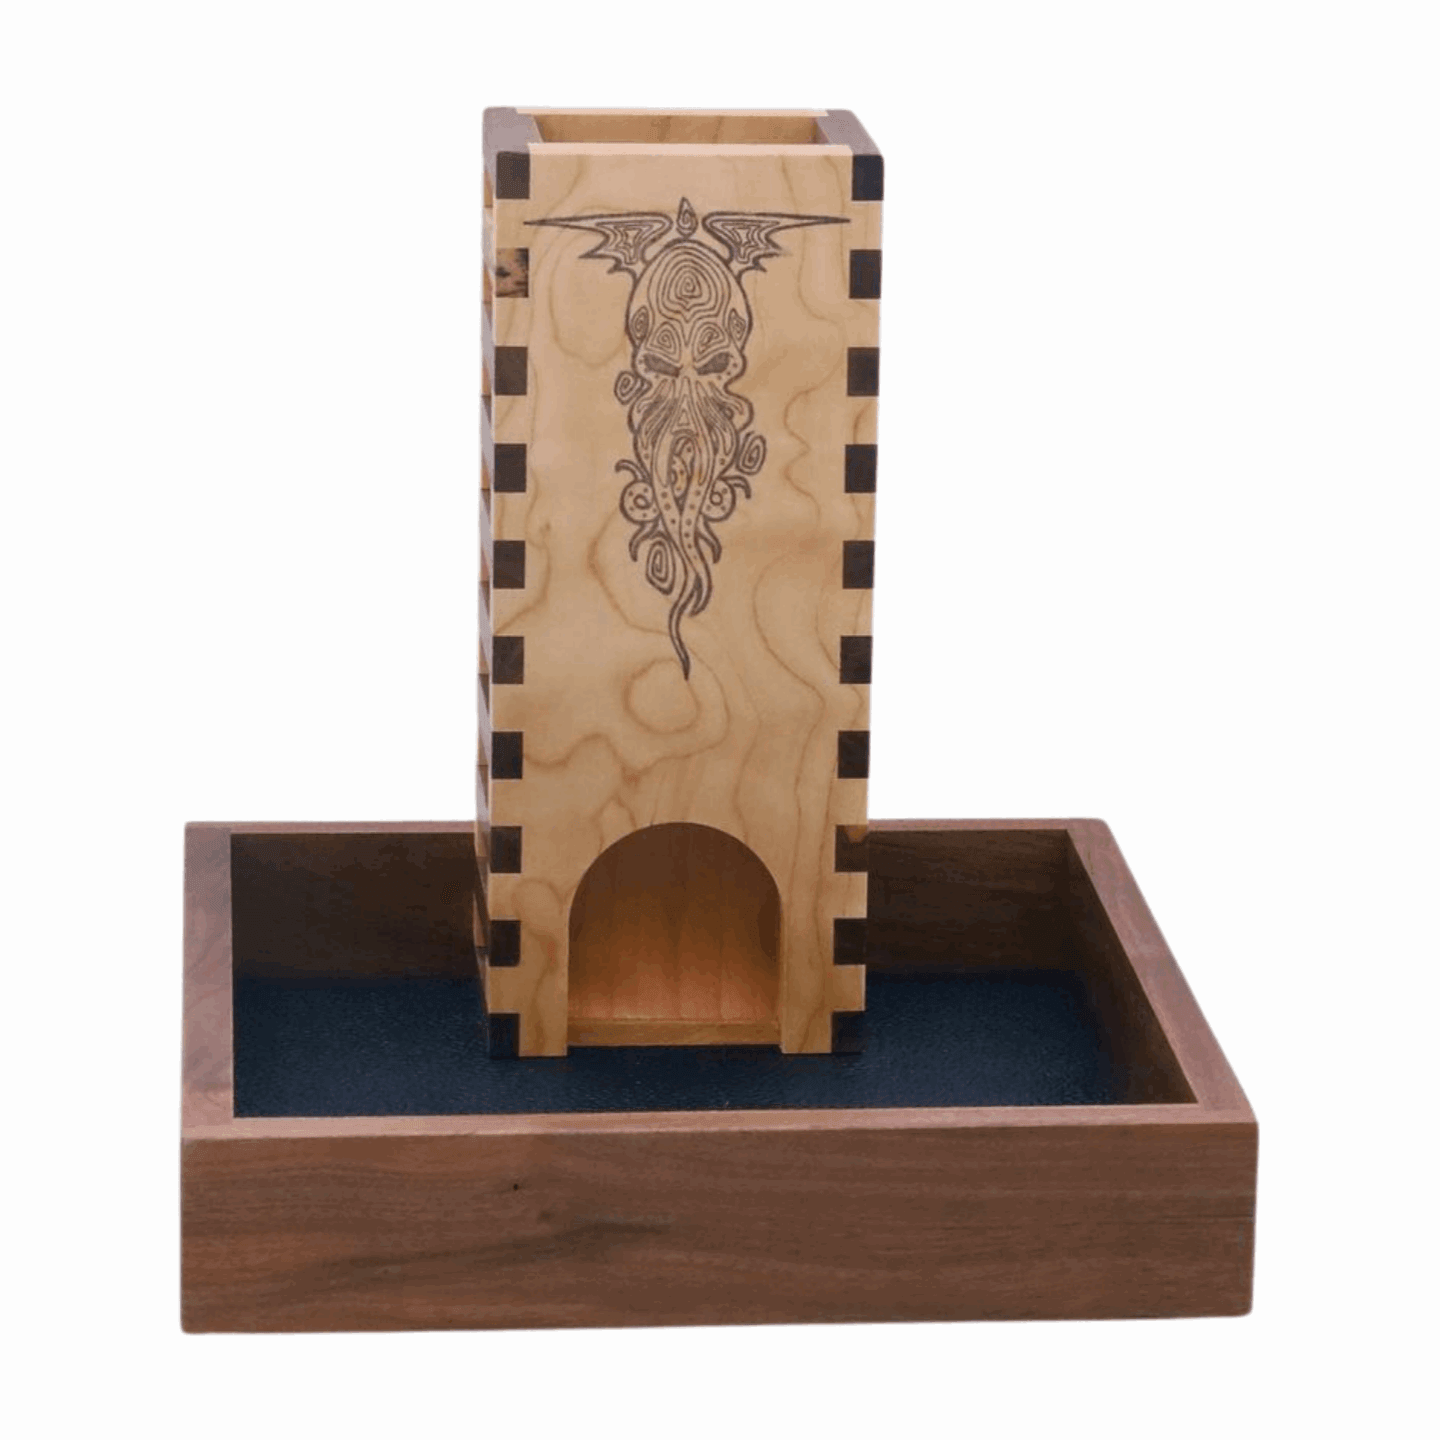 Large Walnut Wood Dice Tray for Tabletop Gaming - Dragon Armor Games